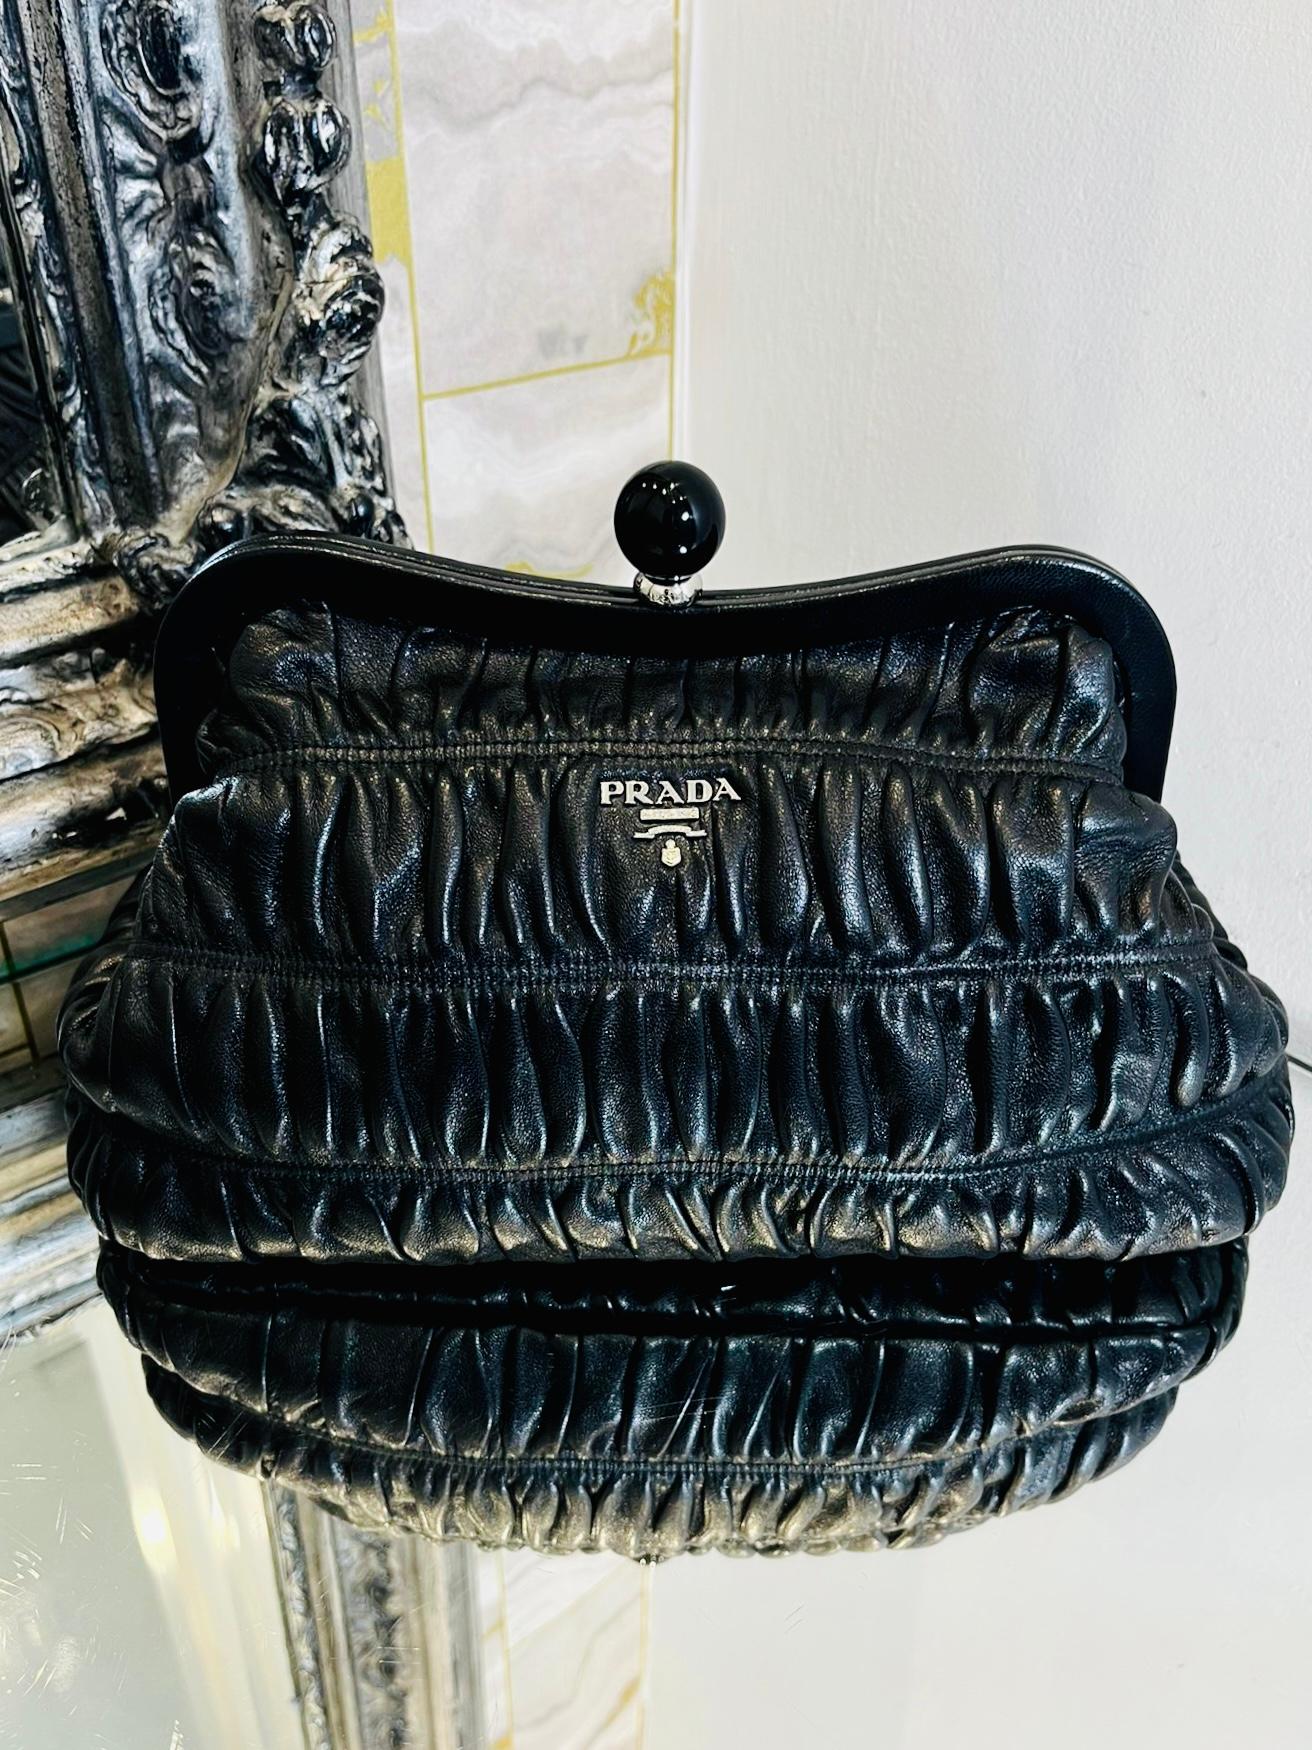 Prada Gaufre Leather Clutch Bag

Black ruched cloud pouch style leather clutch nag with plexi glass ball trim to the top 

of the bag and 'Prada' logo in silver lettering to the front.

Size - Height 18cm, Width 31cm, Depth 10cm

Condition - Very